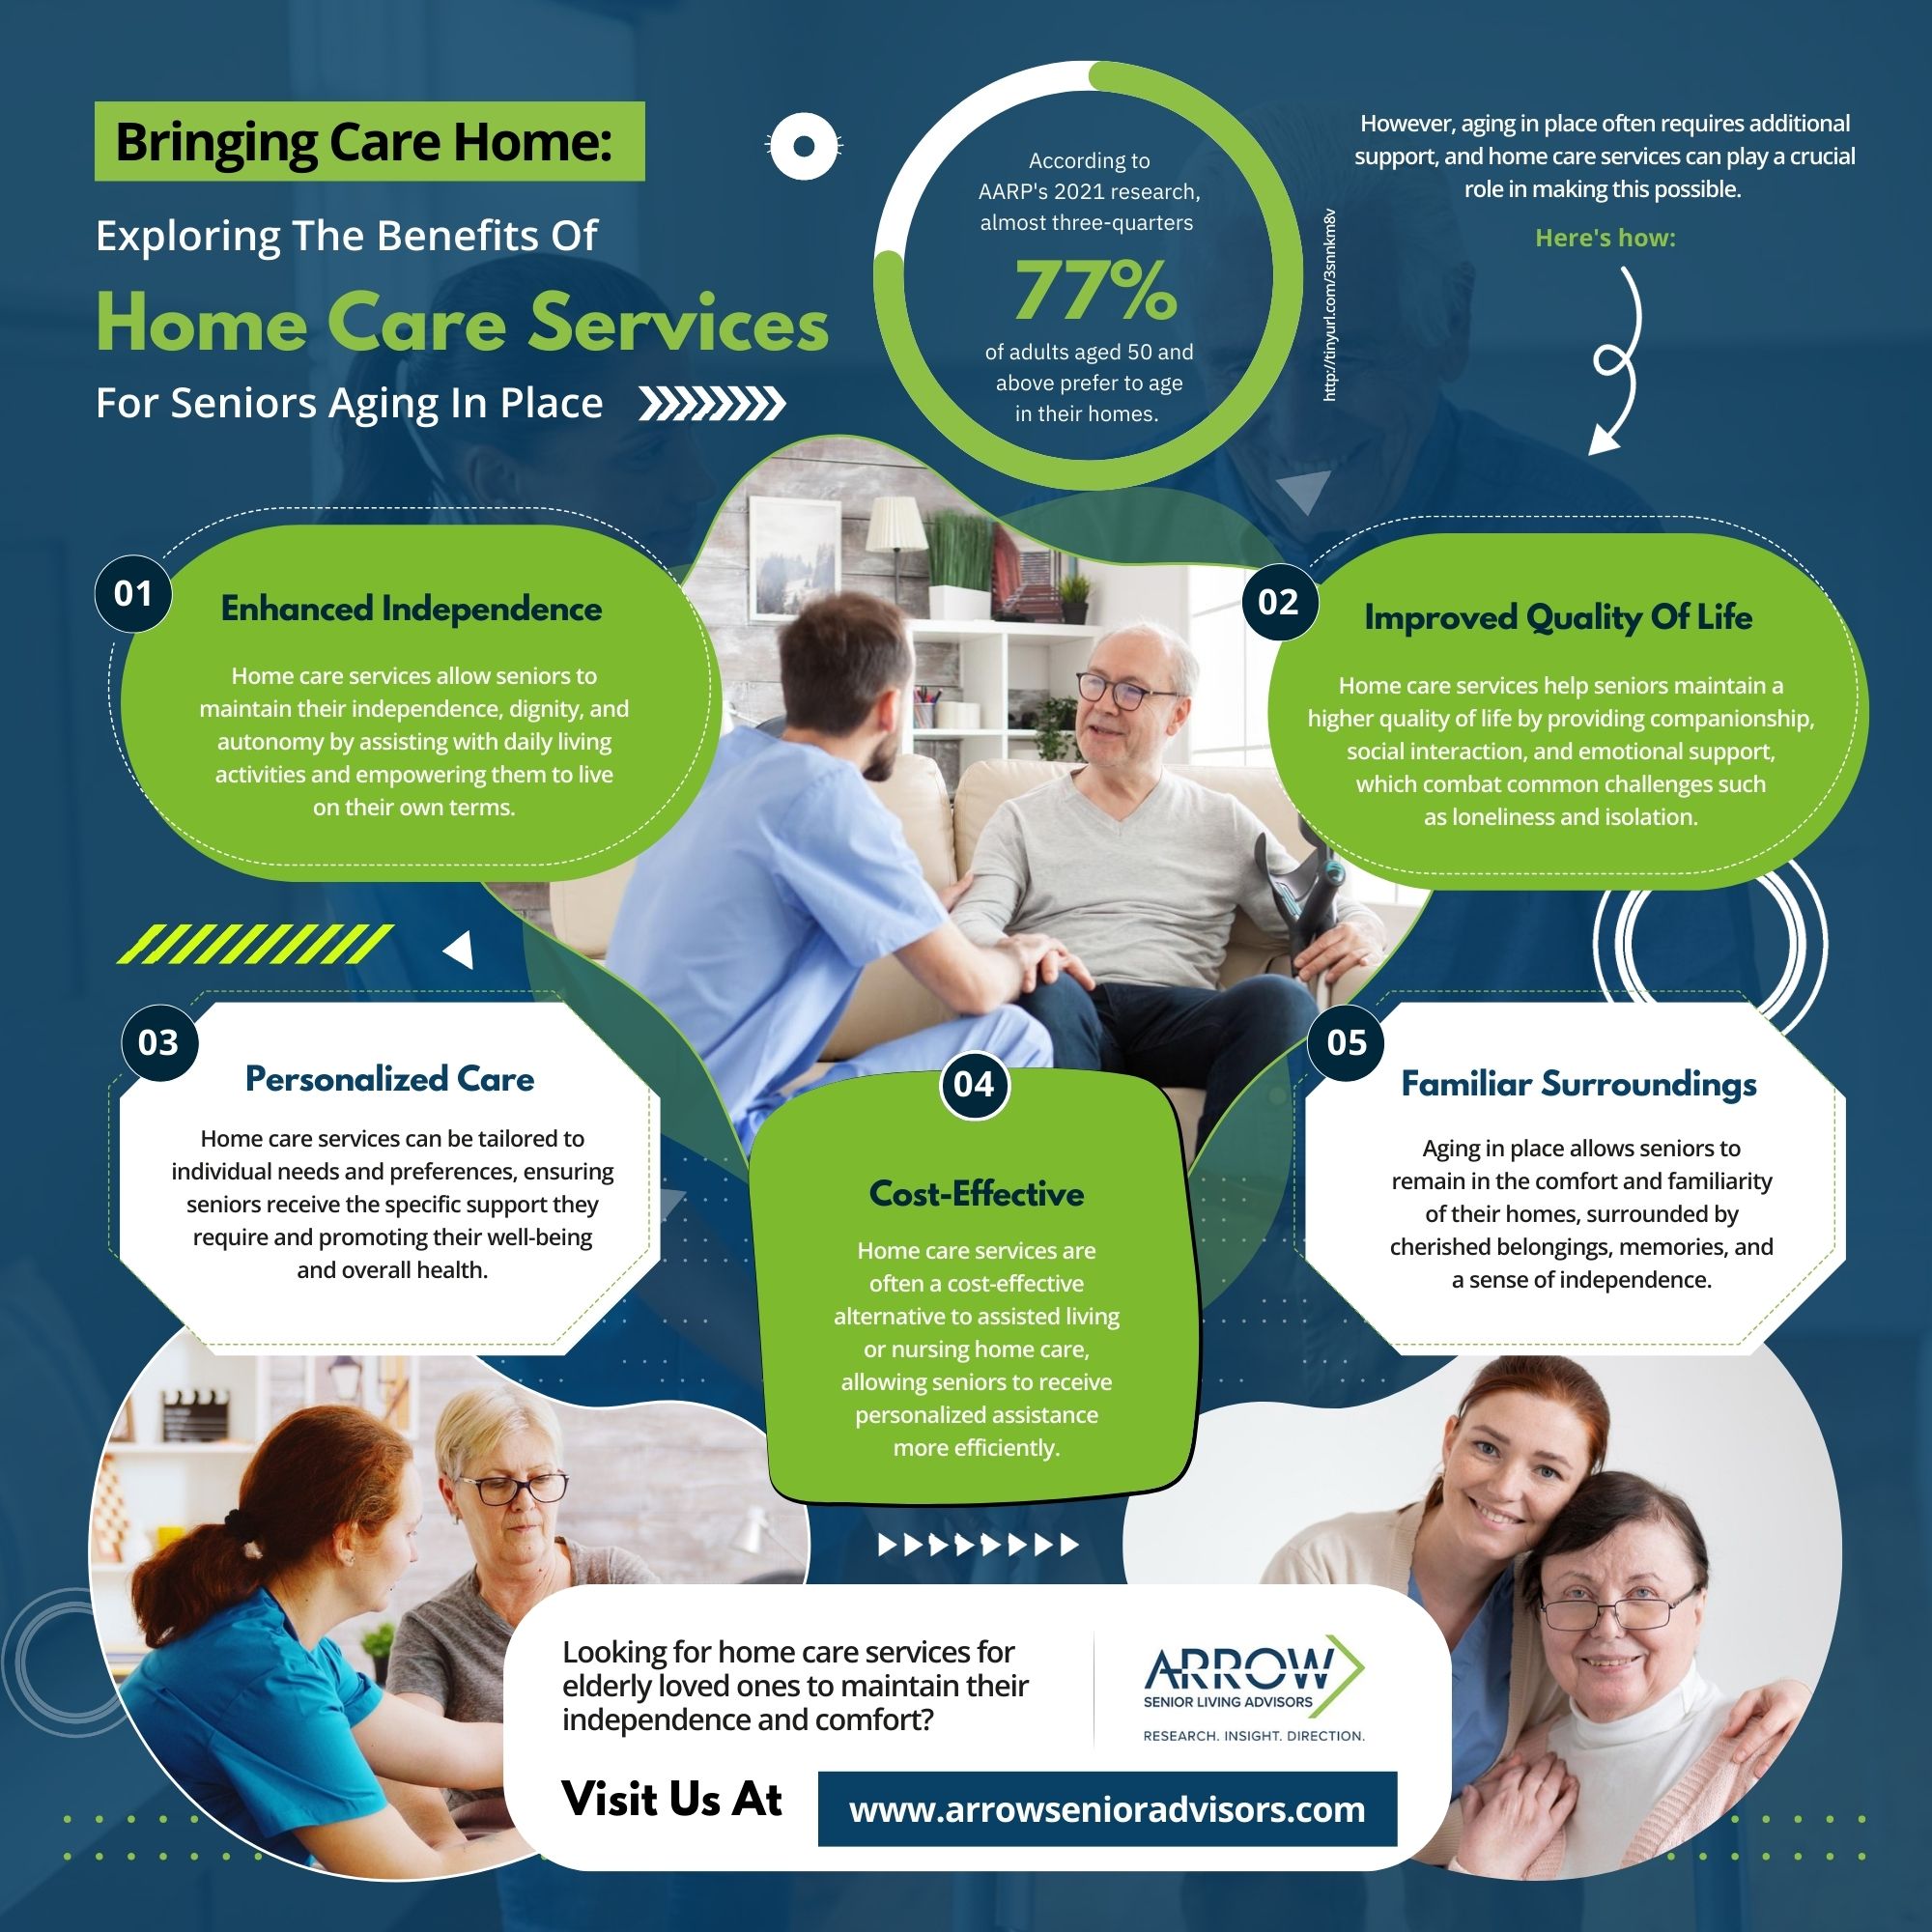 Bringing Care Home: Exploring the Benefits of Home Care Services For Seniors Aging in Place